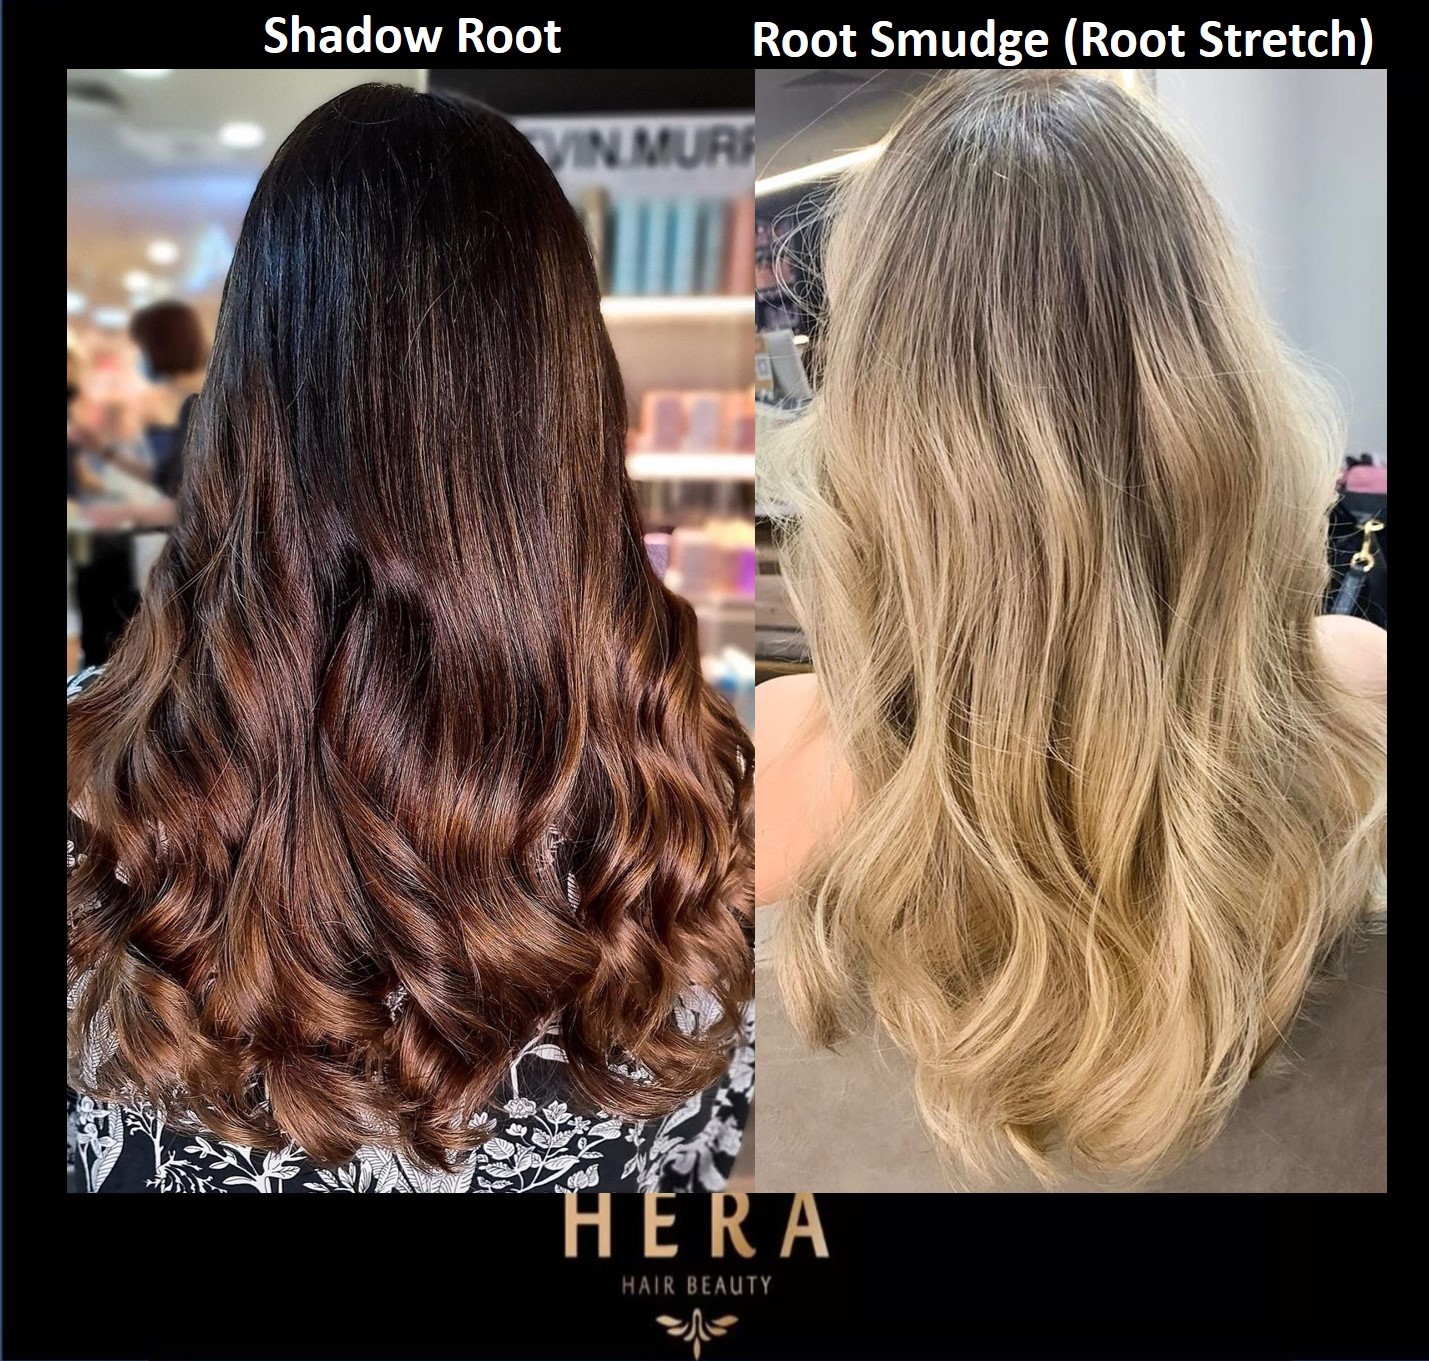 Shadow Root vs Root Smudge (Root Stretch) | Hera Hair Beauty